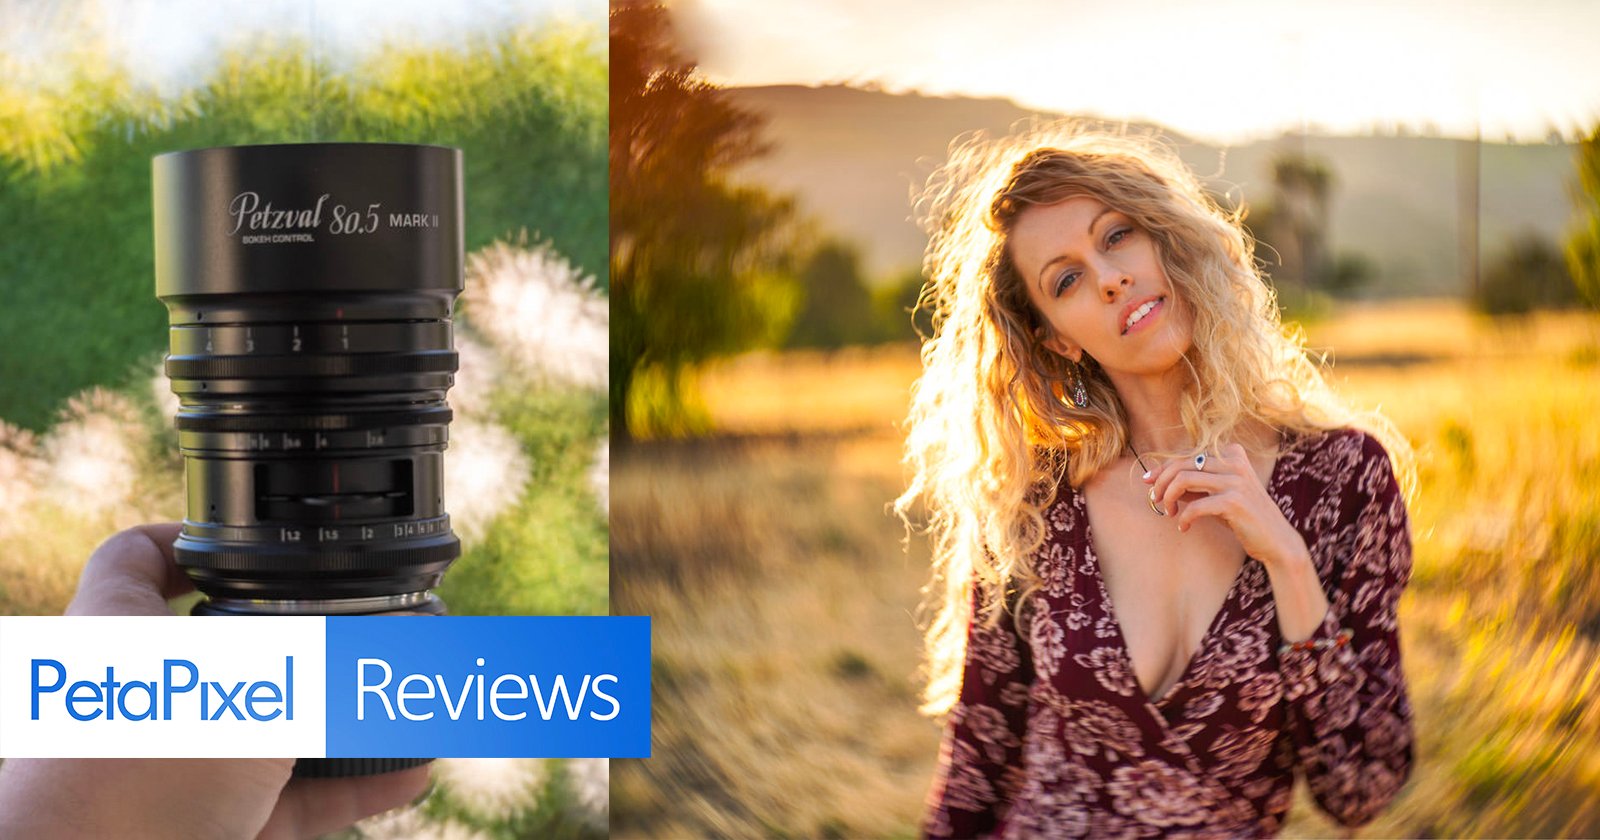 vreugde US dollar Obsessie Petzval 80.5mm f/1.9 MKII Review: A Stunning Vintage-Style Lens | PetaPixel